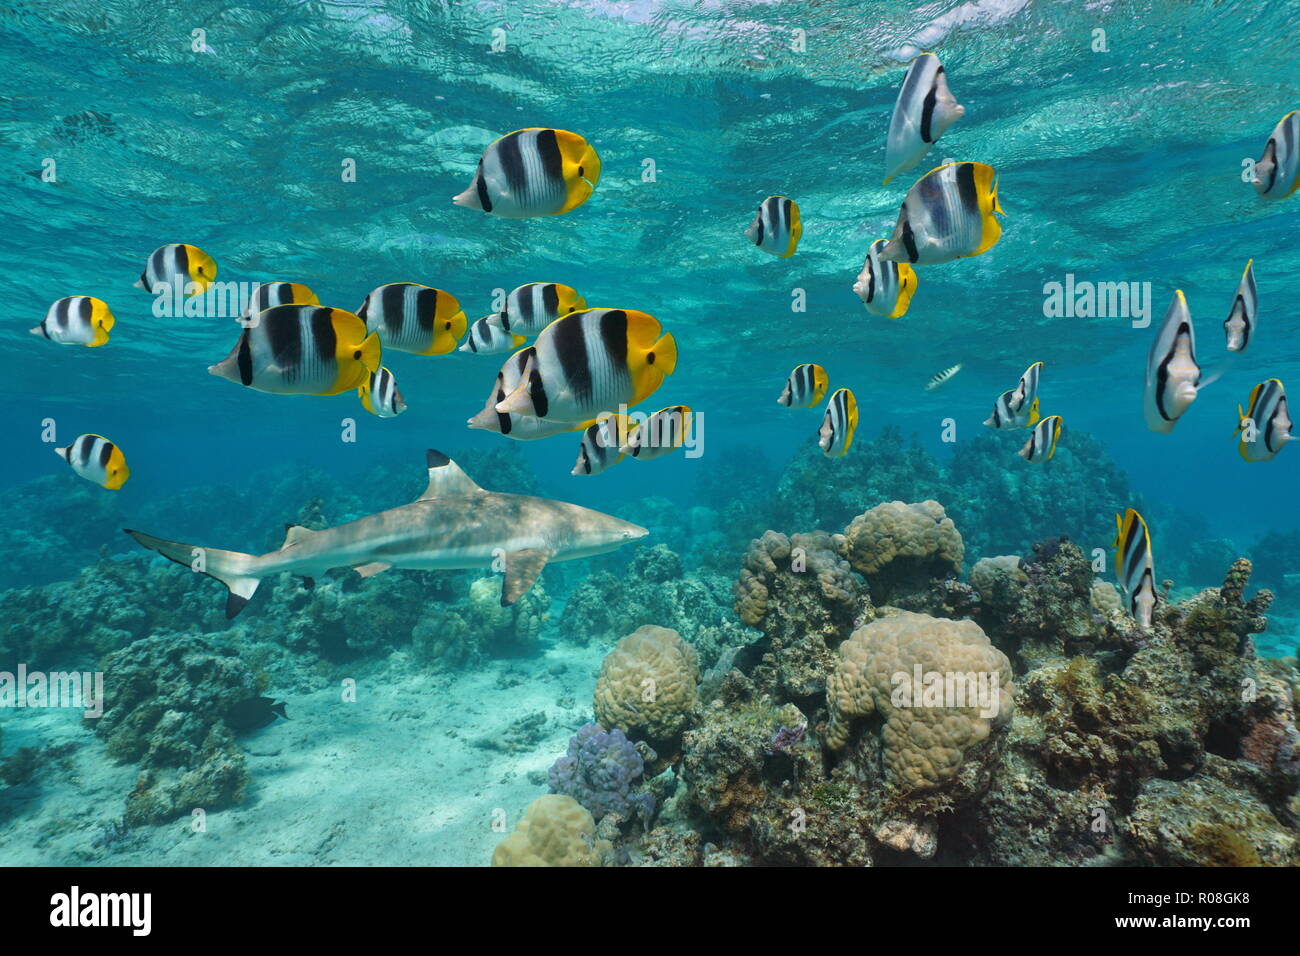 A school of tropical fish pacific double saddle butterflyfish with a blacktip reef shark and coral underwater, south Pacific ocean, French Polynesia Stock Photo